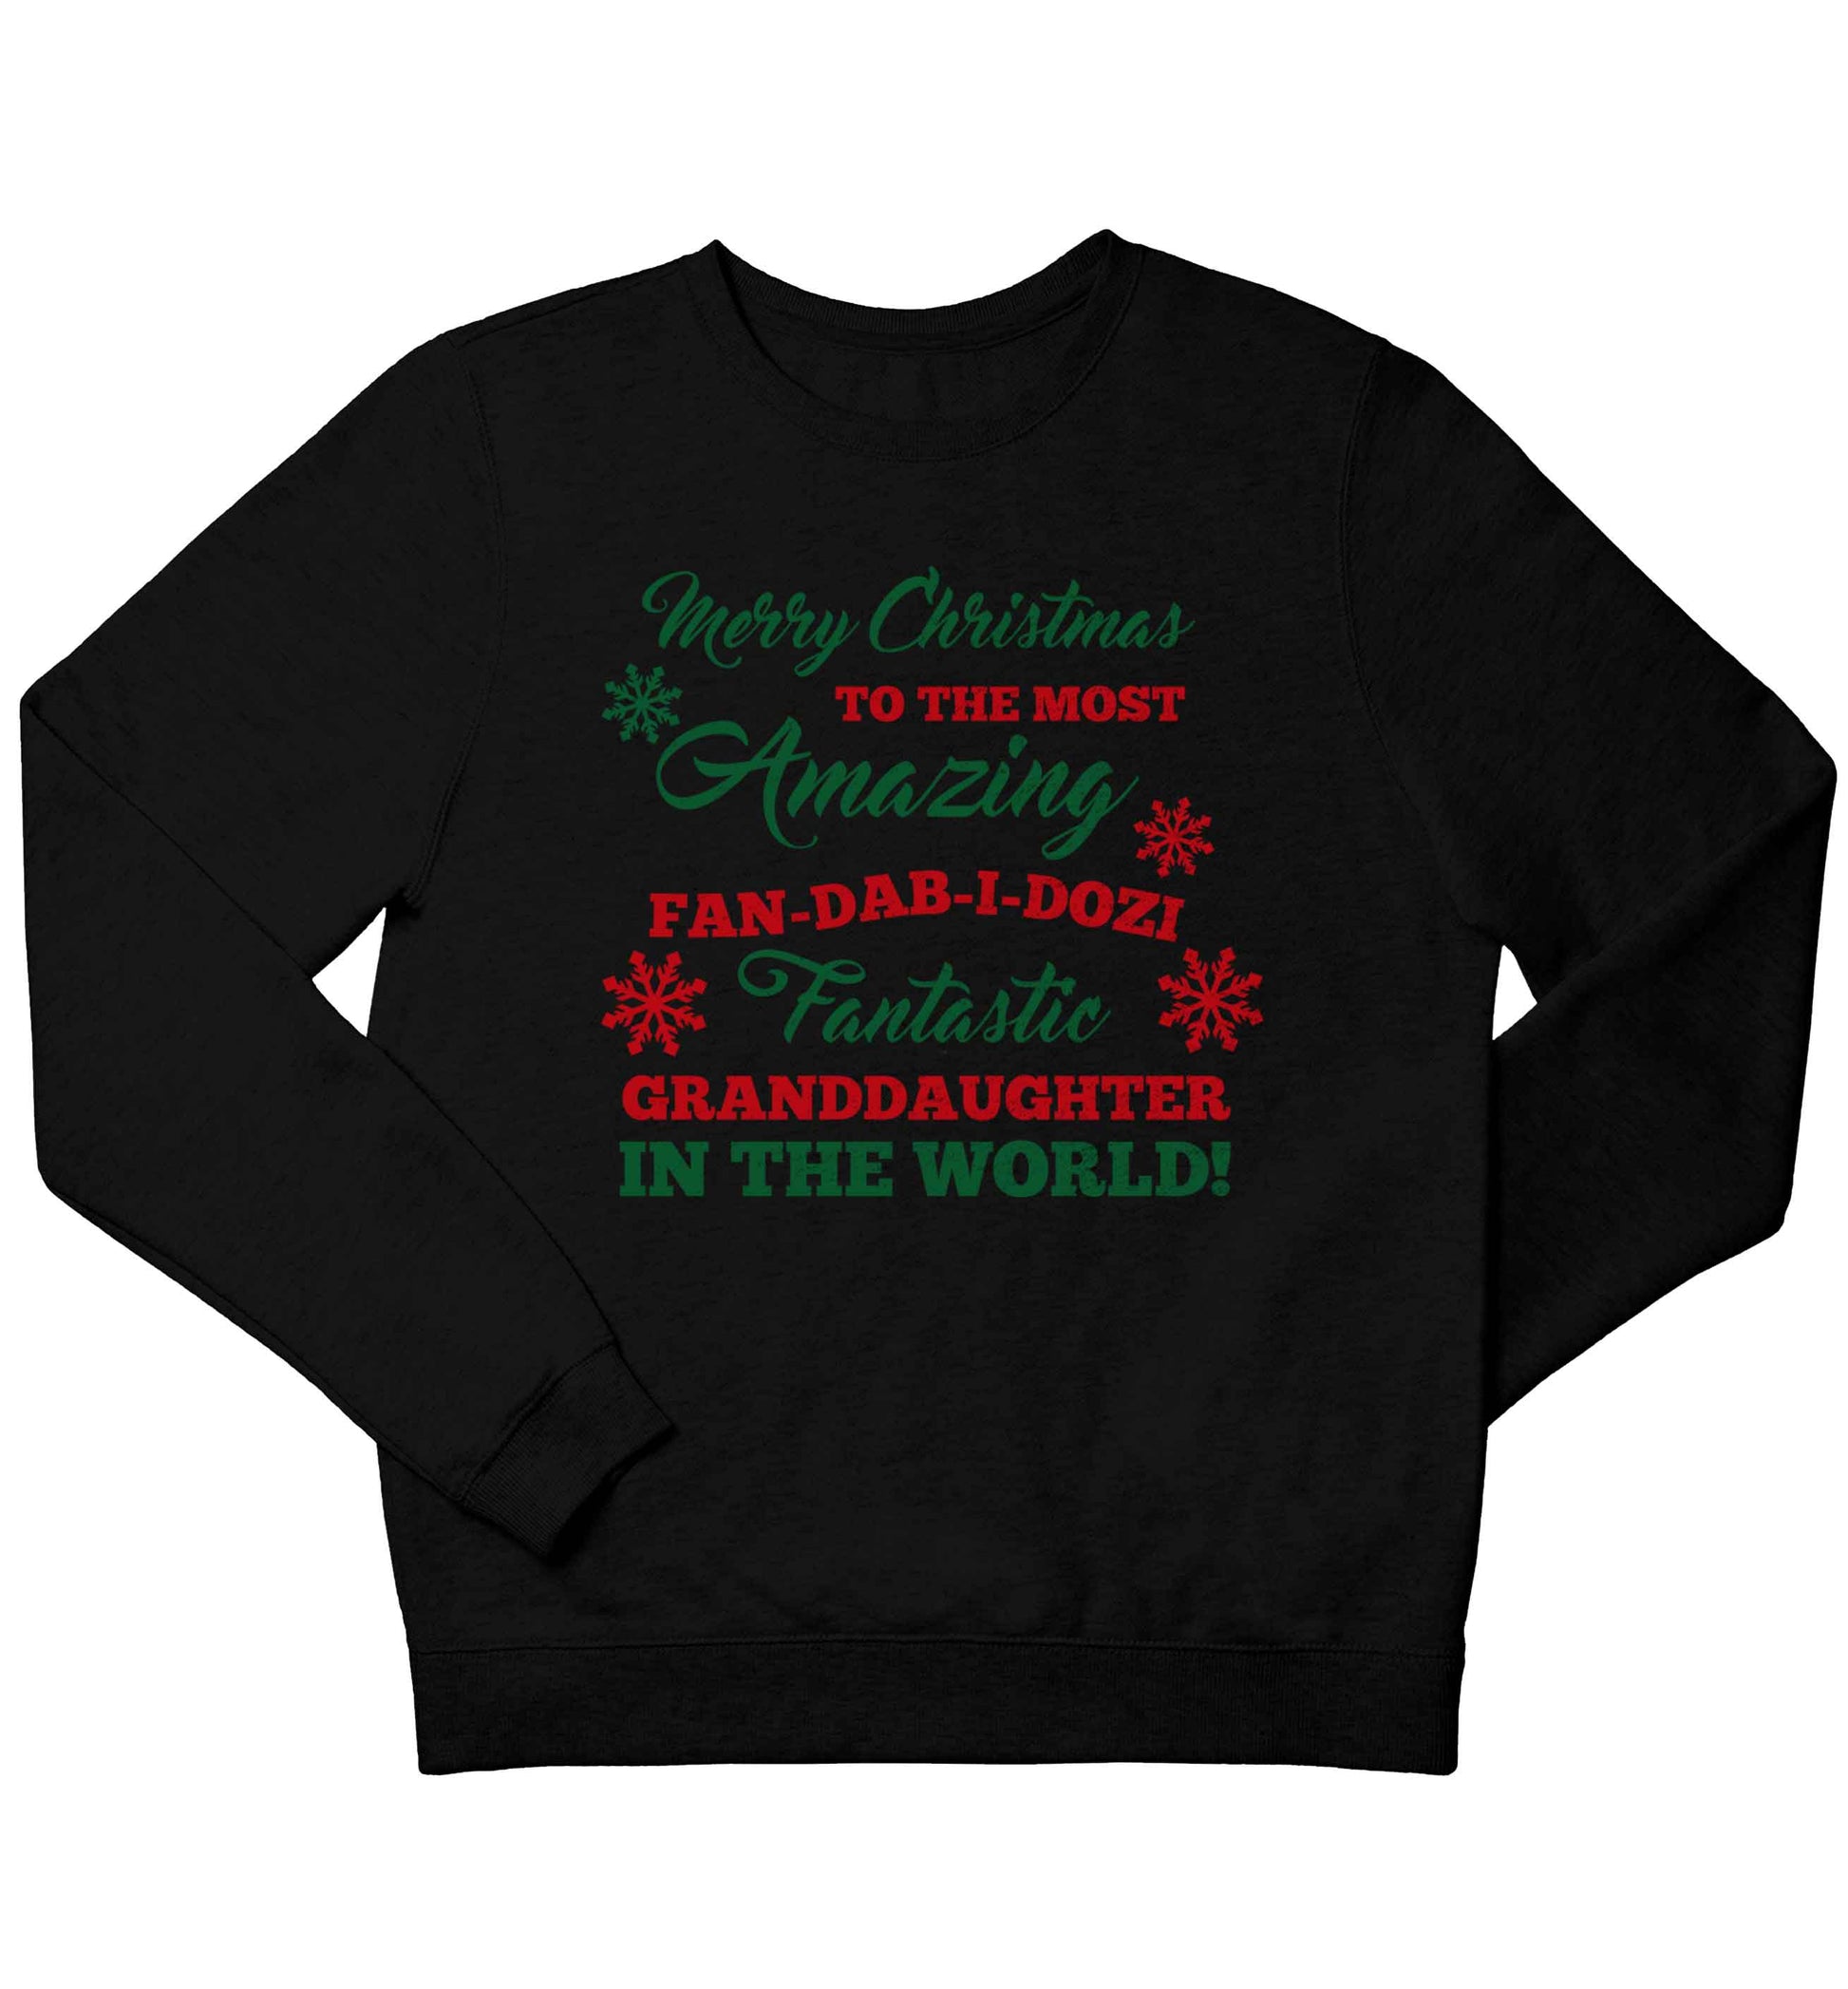 Merry Christmas to the most amazing fan-dab-i-dozi fantasic Granddaughter in the world children's black sweater 12-13 Years